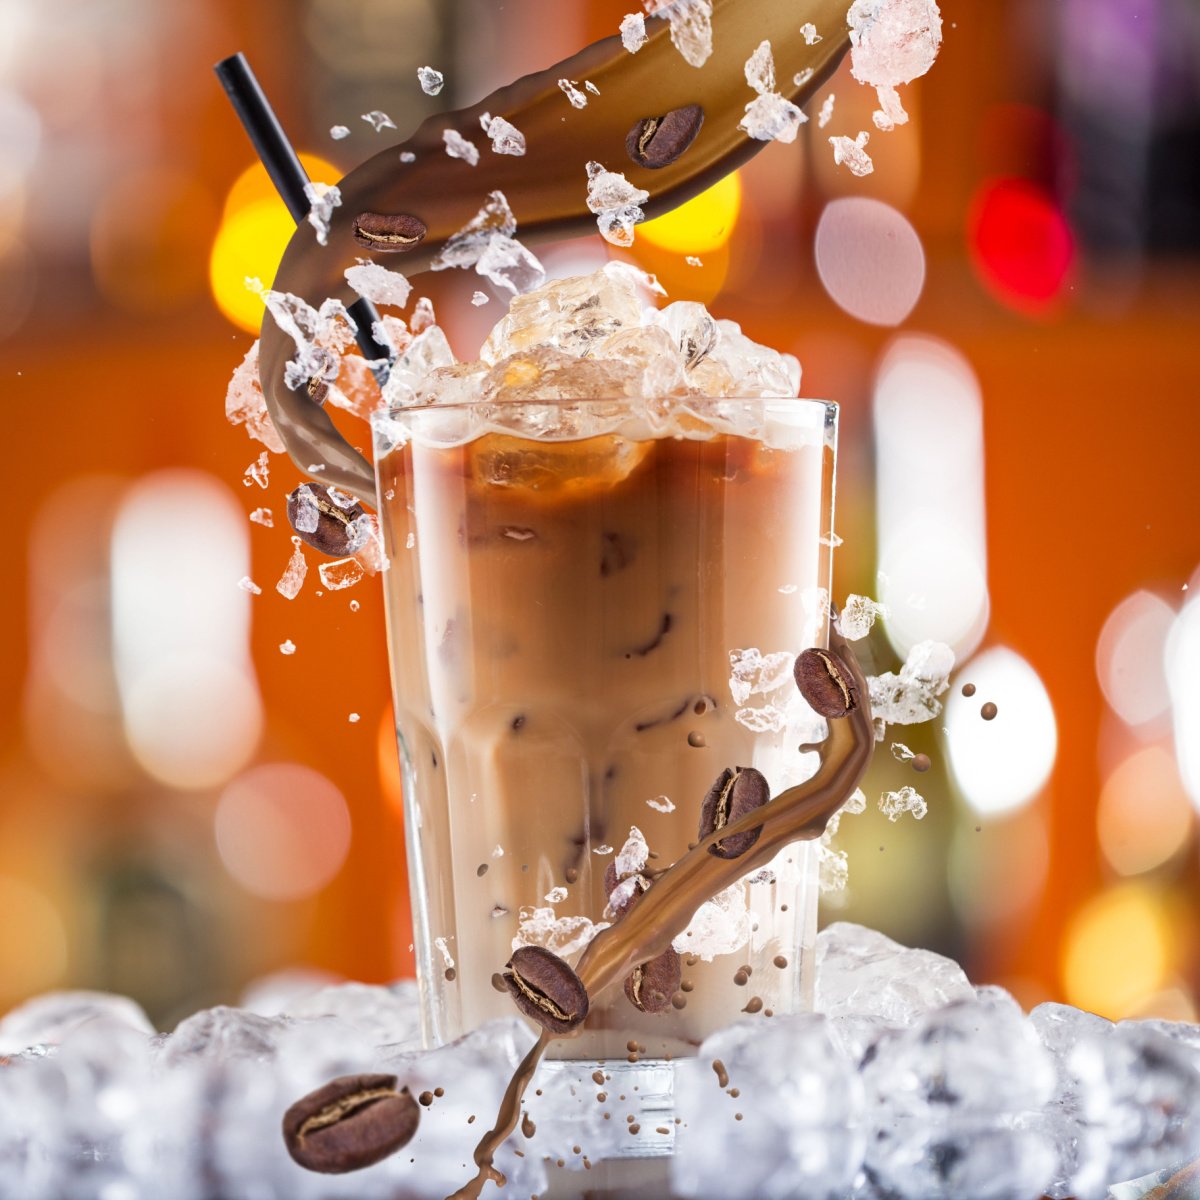 ice chips and coffee beans splashing into cold coffee in tall transparent glass